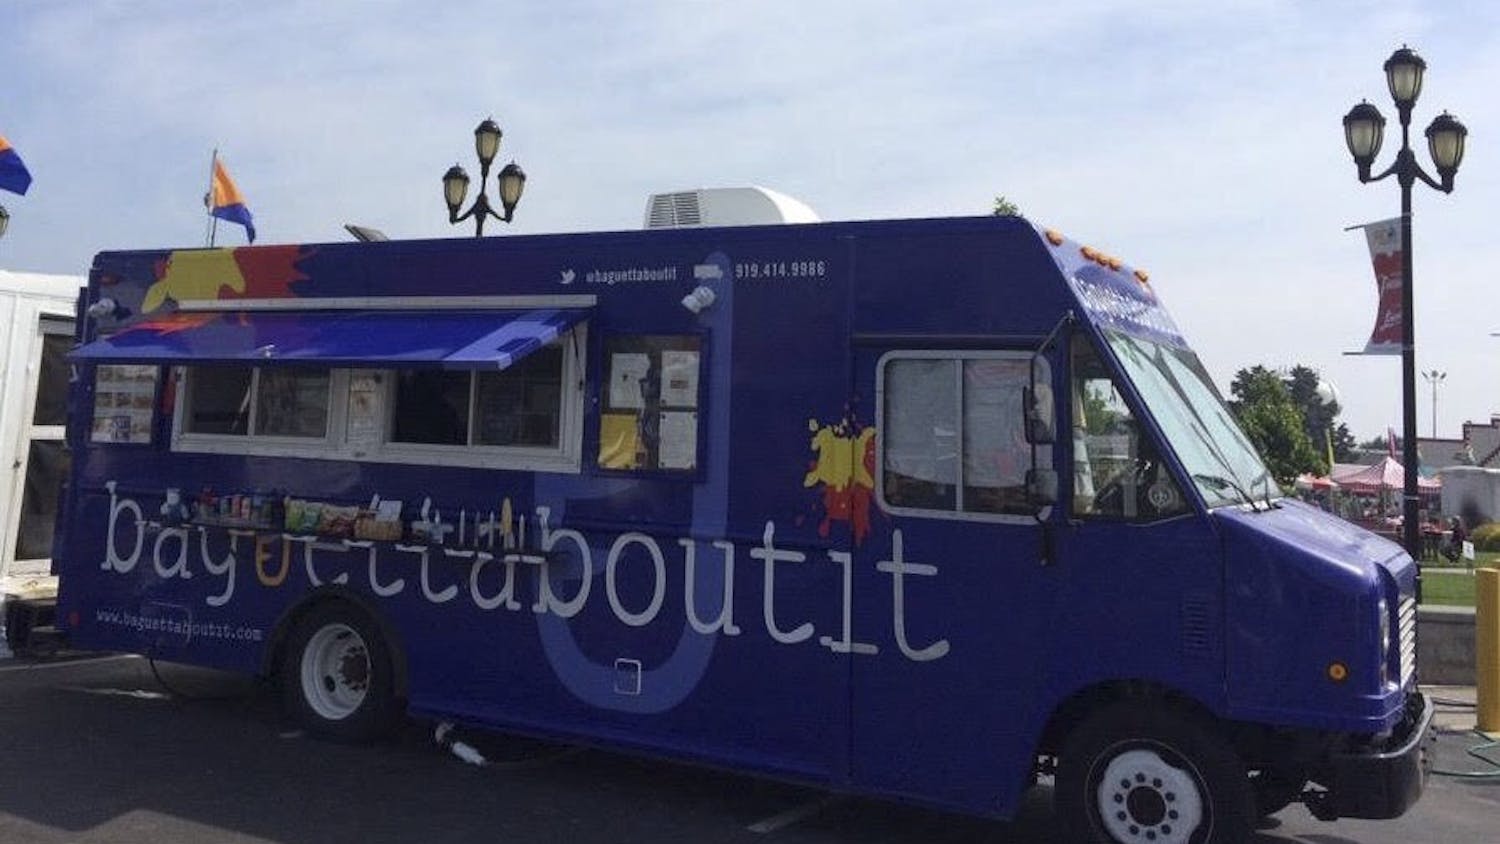 The Baguetteaboutit food truck will be in attendance for food truck rodeo on Sunday on Rosemary Street.&nbsp;Photo Courtesy of&nbsp;Cristal Phillips.